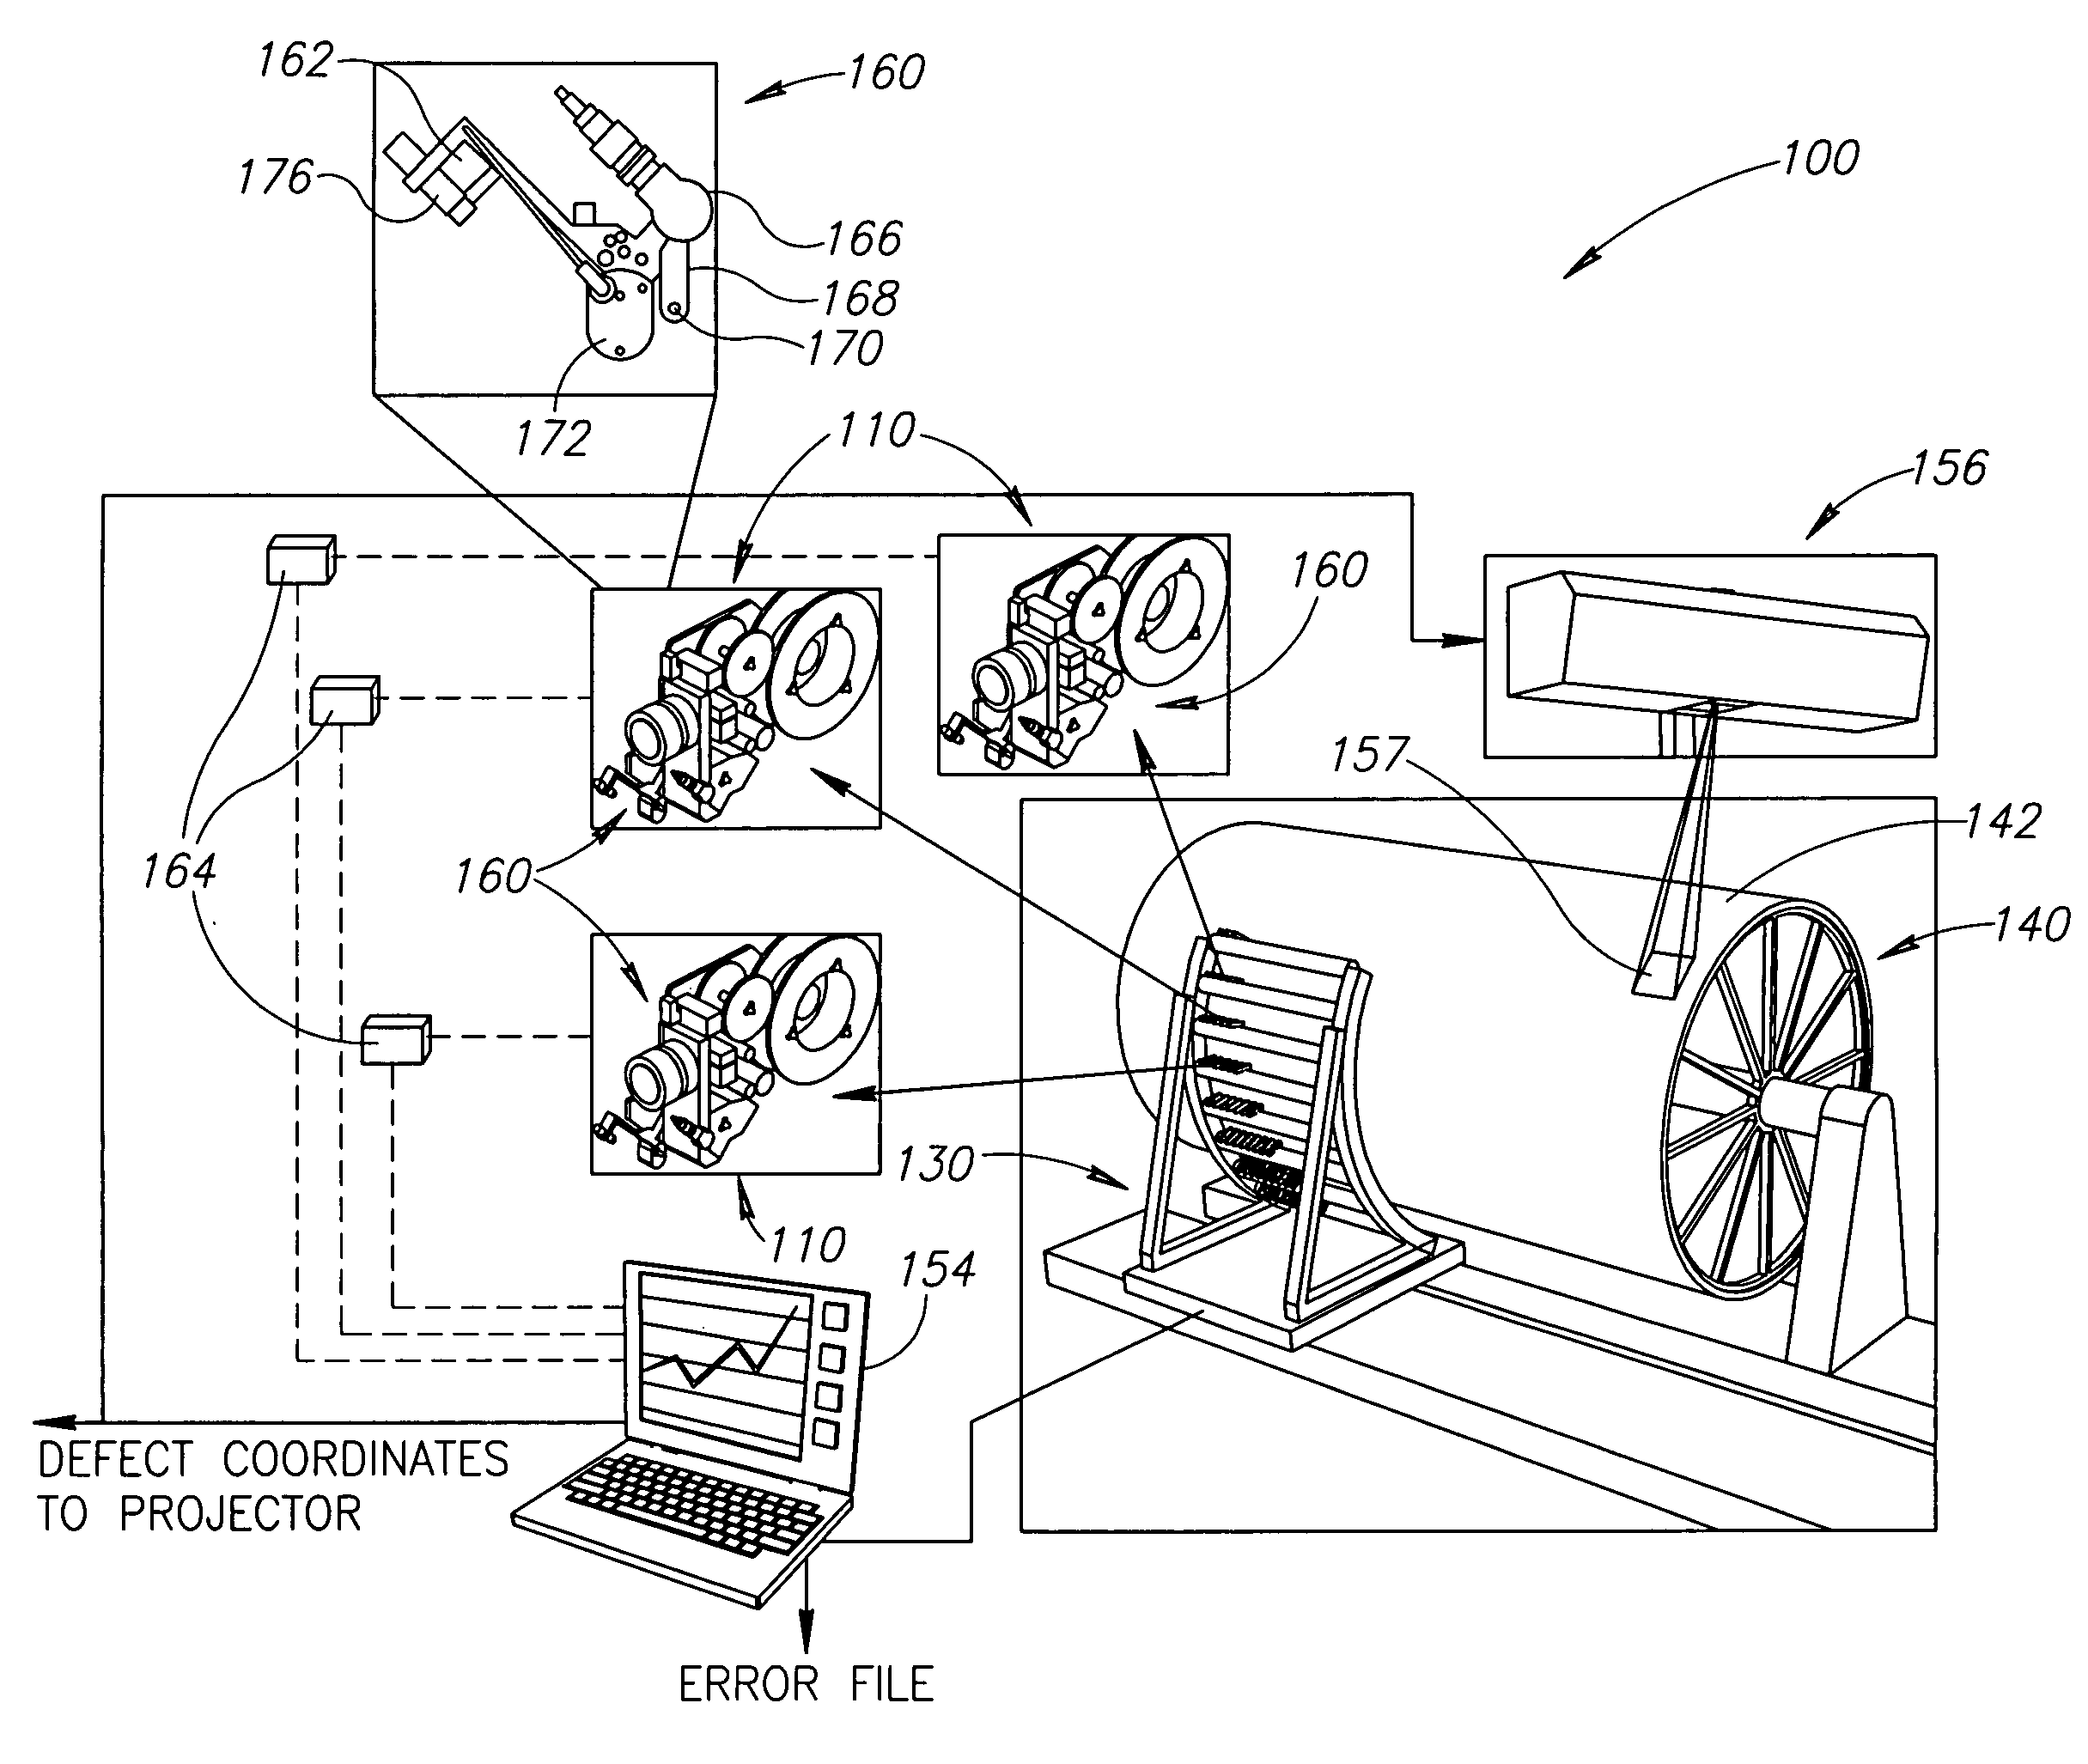 Systems and methods for in-process vision inspection for automated machines